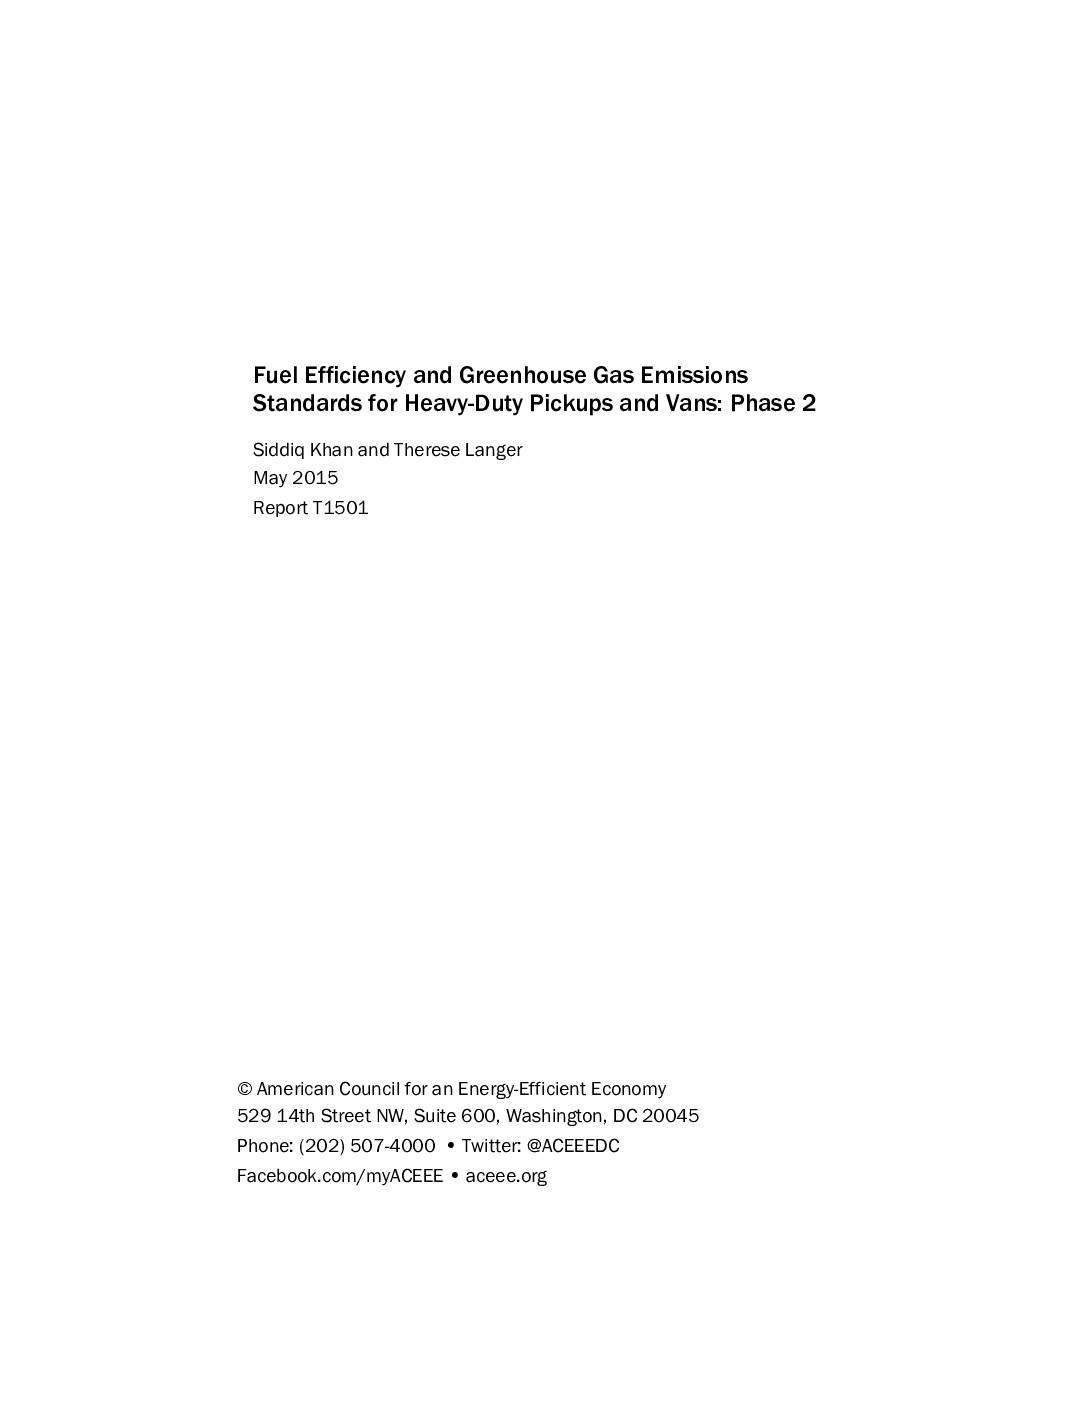 Fuel Efficiency and Greenhouse Gas Emissions Standards for Heavy-Duty Pickups and Vans: Phase 2